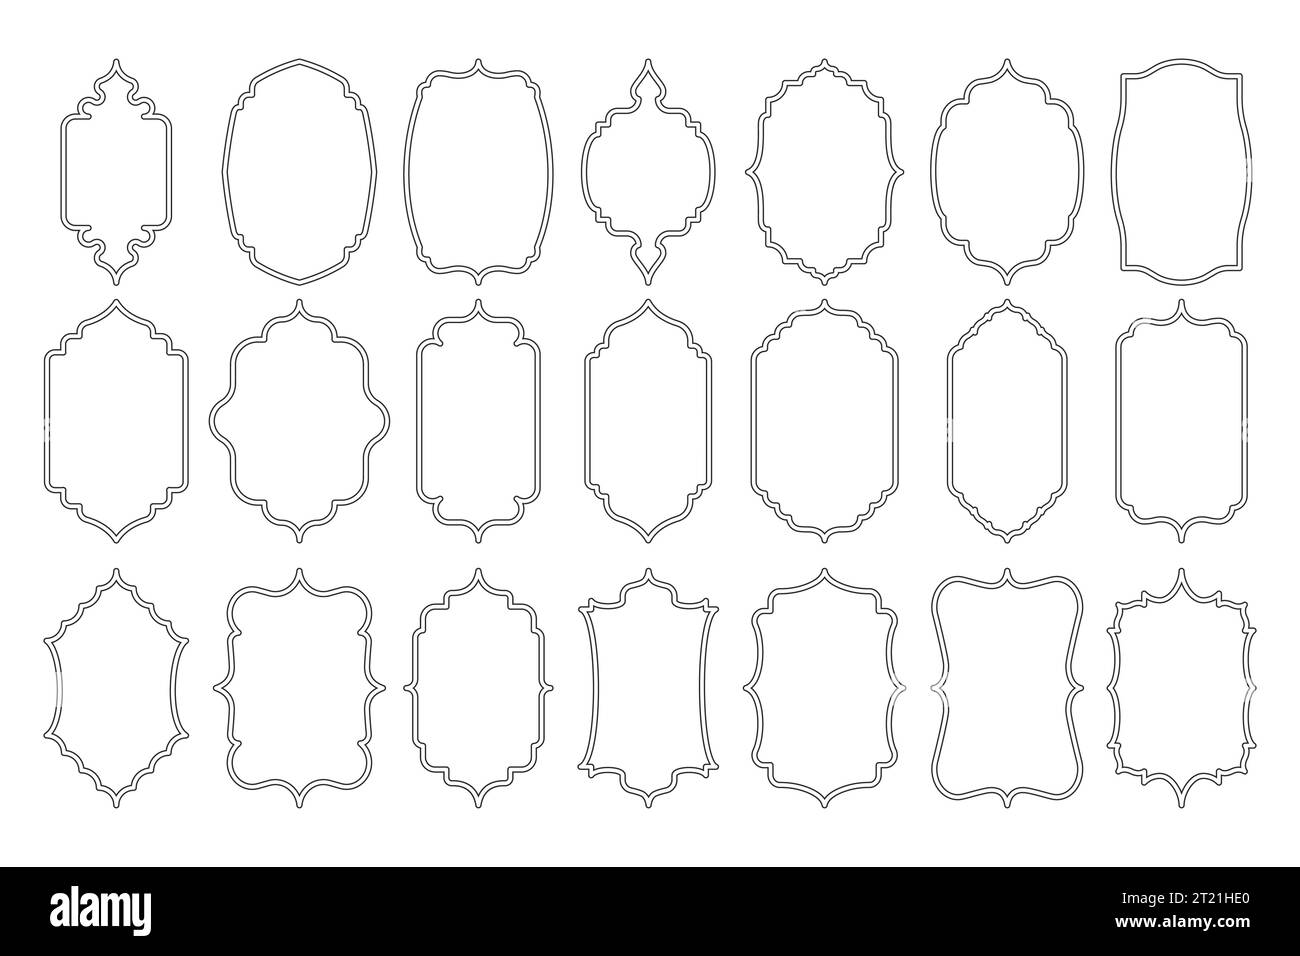 Islamic line shapes. Abstract arabic geometric borders, islamic arabesque silhouettes and simple decorative elements. Vector isolated collection Stock Vector